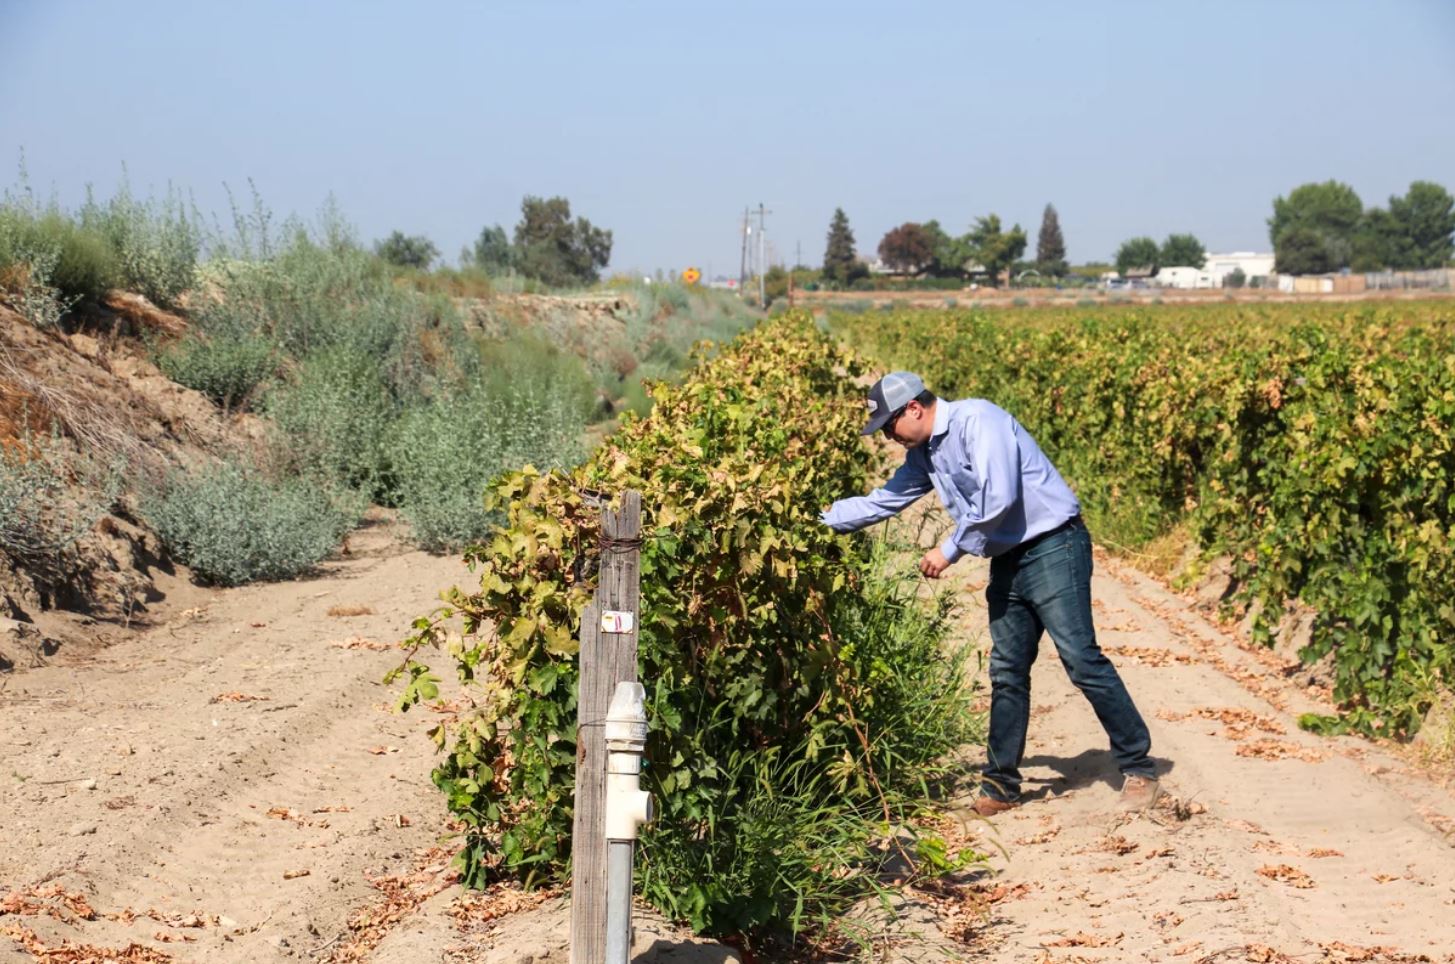 A man wearing a dress shirt, jeans, and a baseball cap bends over to look at a row of grapes growing in an agricultural field.